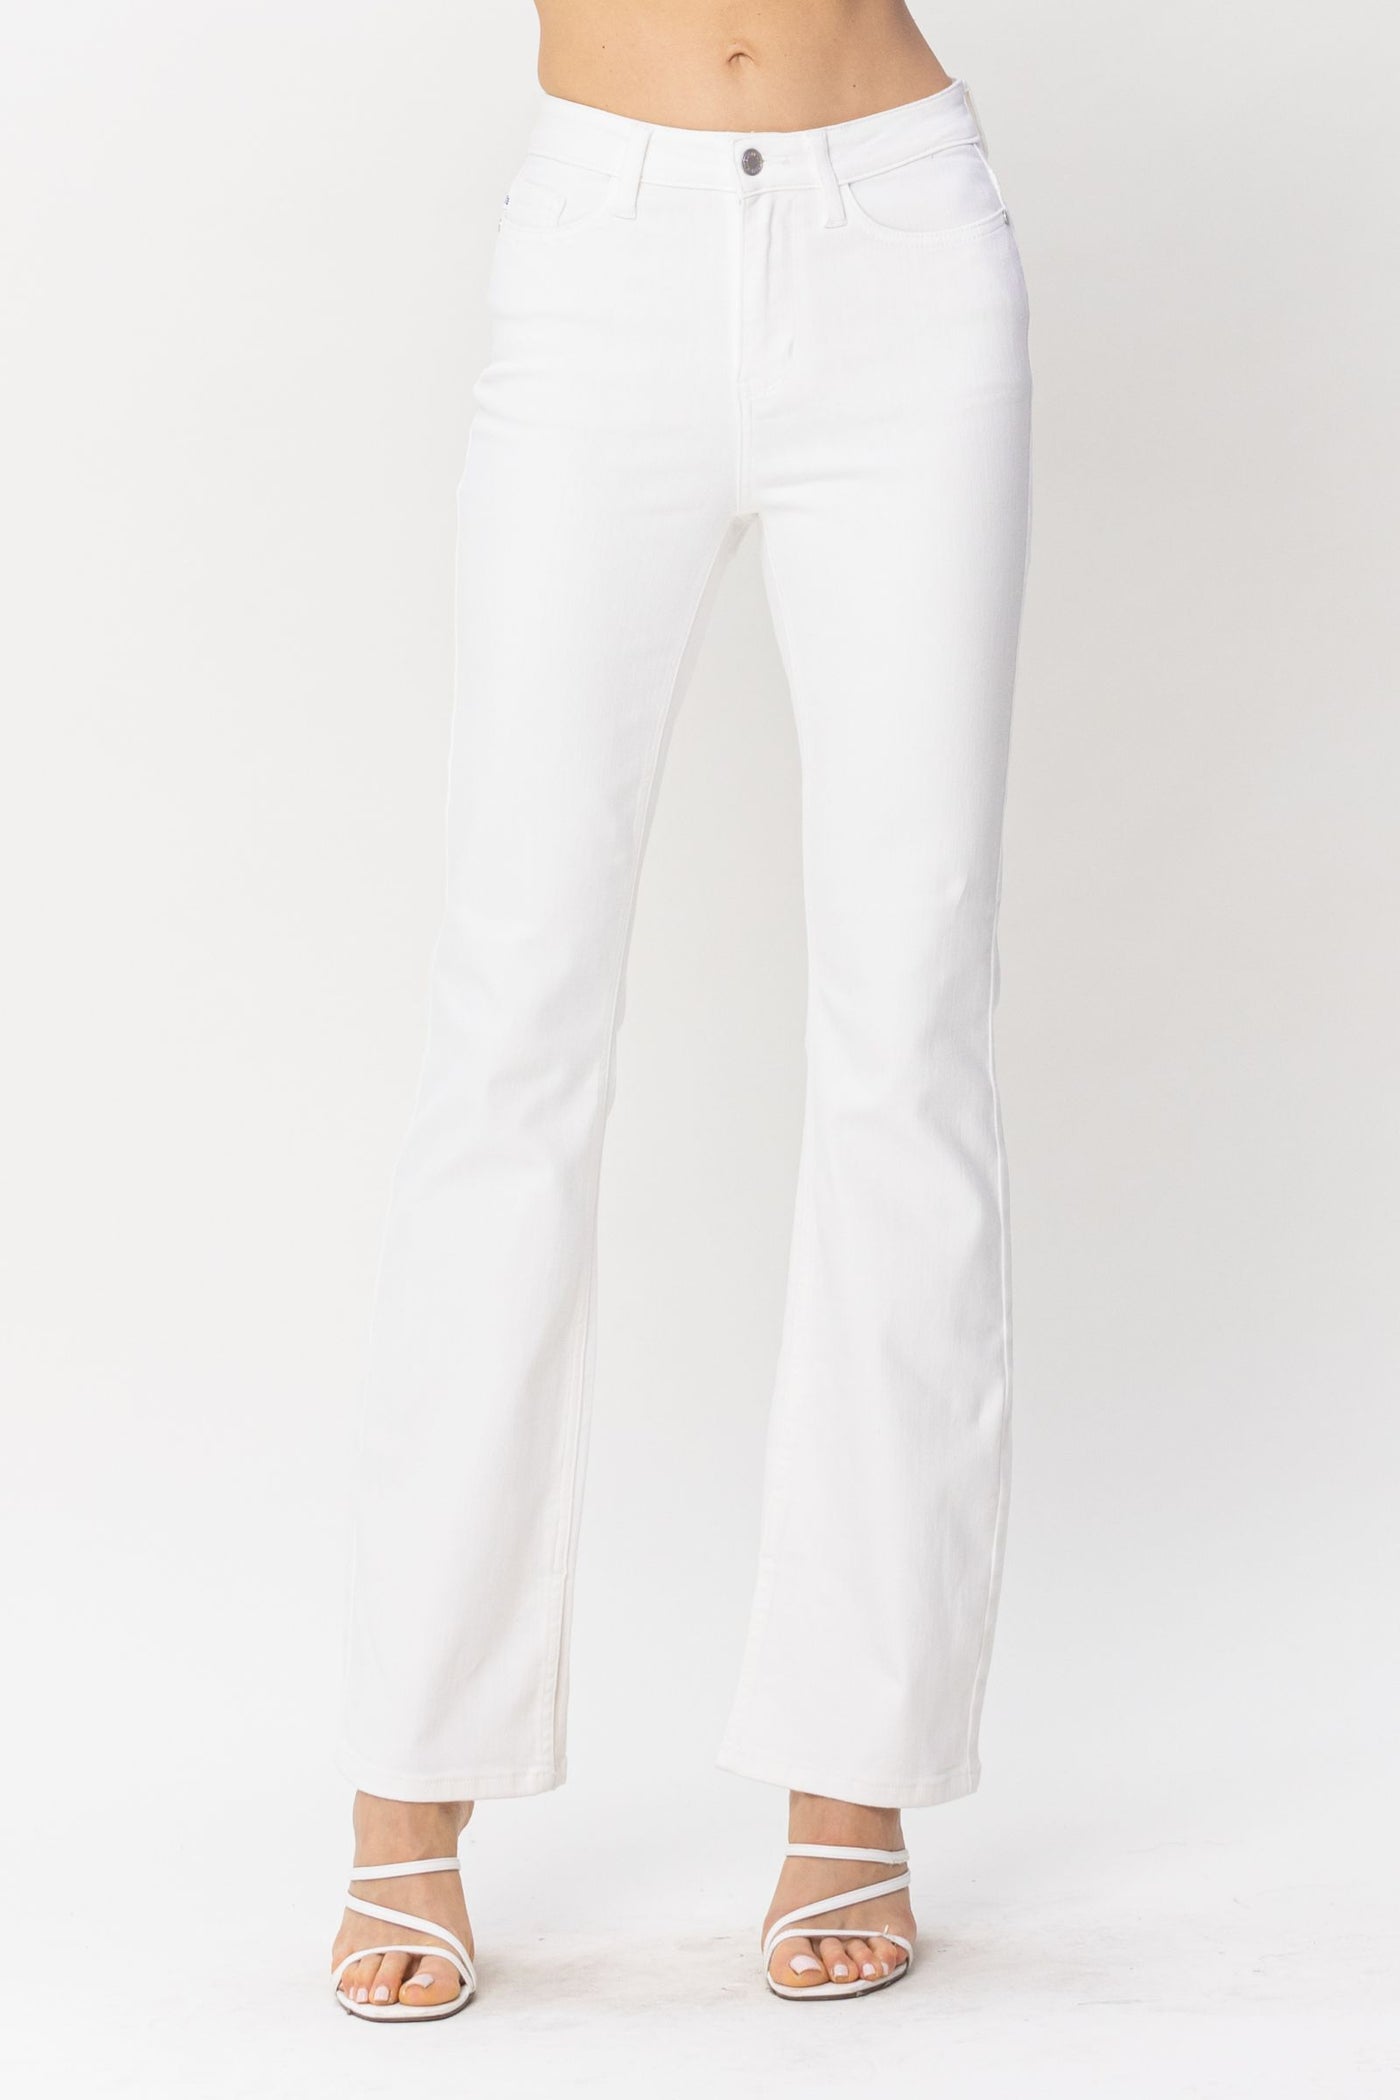 Judy Blue White Slit Bootcut - Corinne Boutique Family Owned and Operated USA